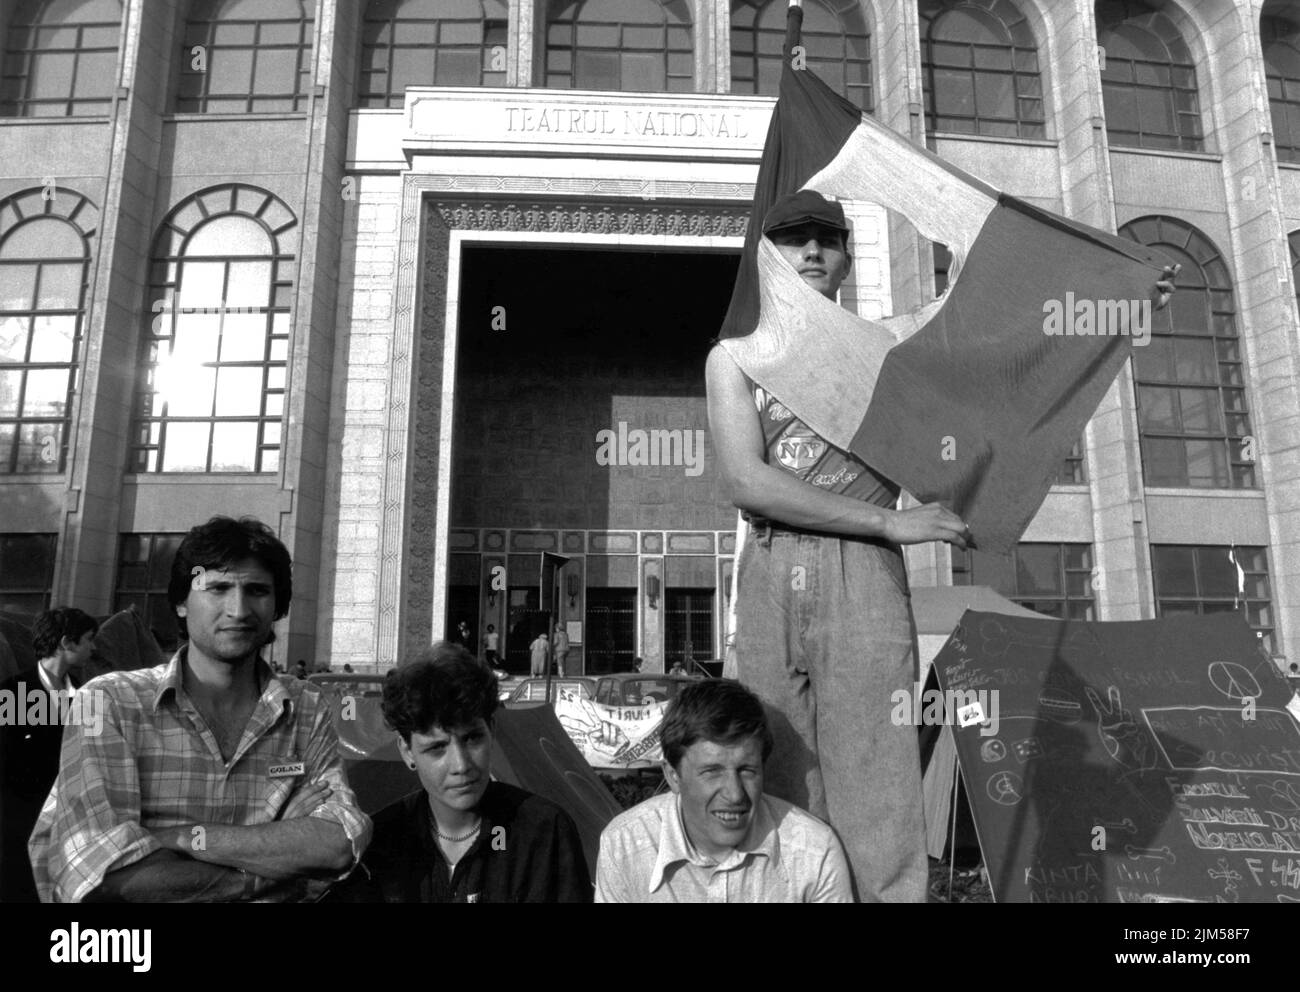 Bucharest, Romania, May 1990. 'Golaniada', a major anti-communism protest  in the University Square following the Romanian Revolution of 1989. People would gather daily to protest the ex-communists that took the power after the Revolution. In this picture, a young man is holding the Romanian flag with the Socialist emblem cut off, an anti-communist symbol during the revolution. Stock Photo